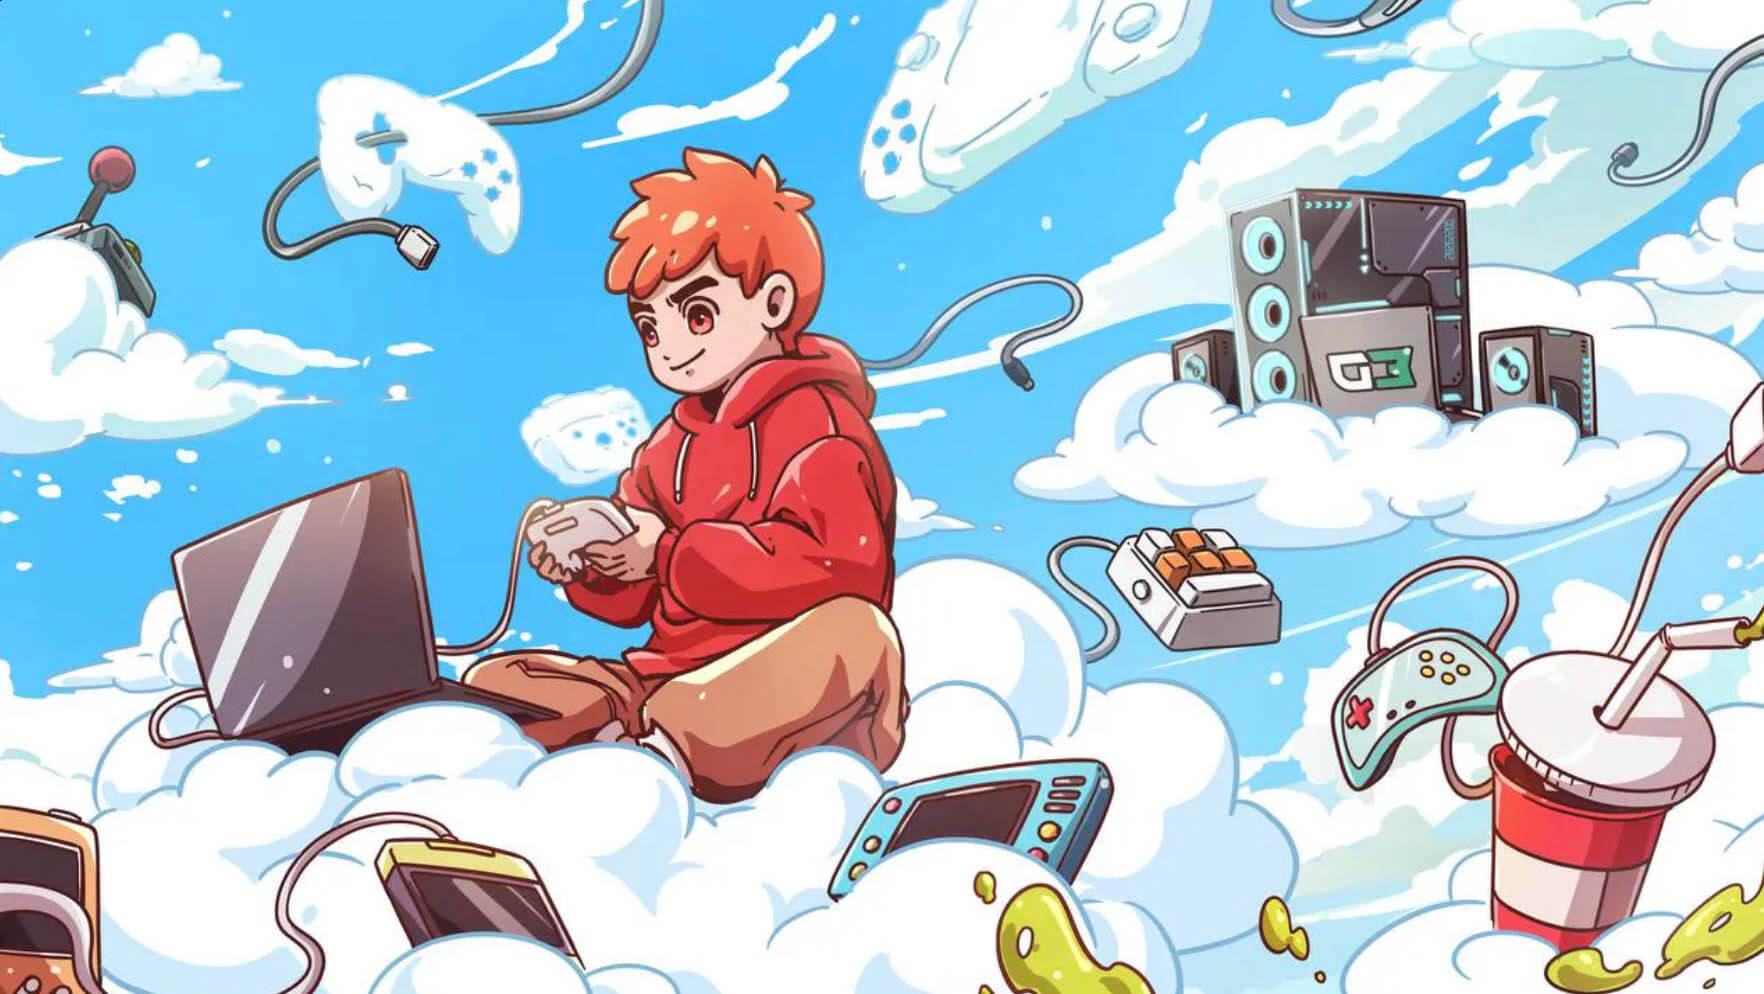 Decentralized Web3 cloud gaming platform coming this summer in partnership with Aethir